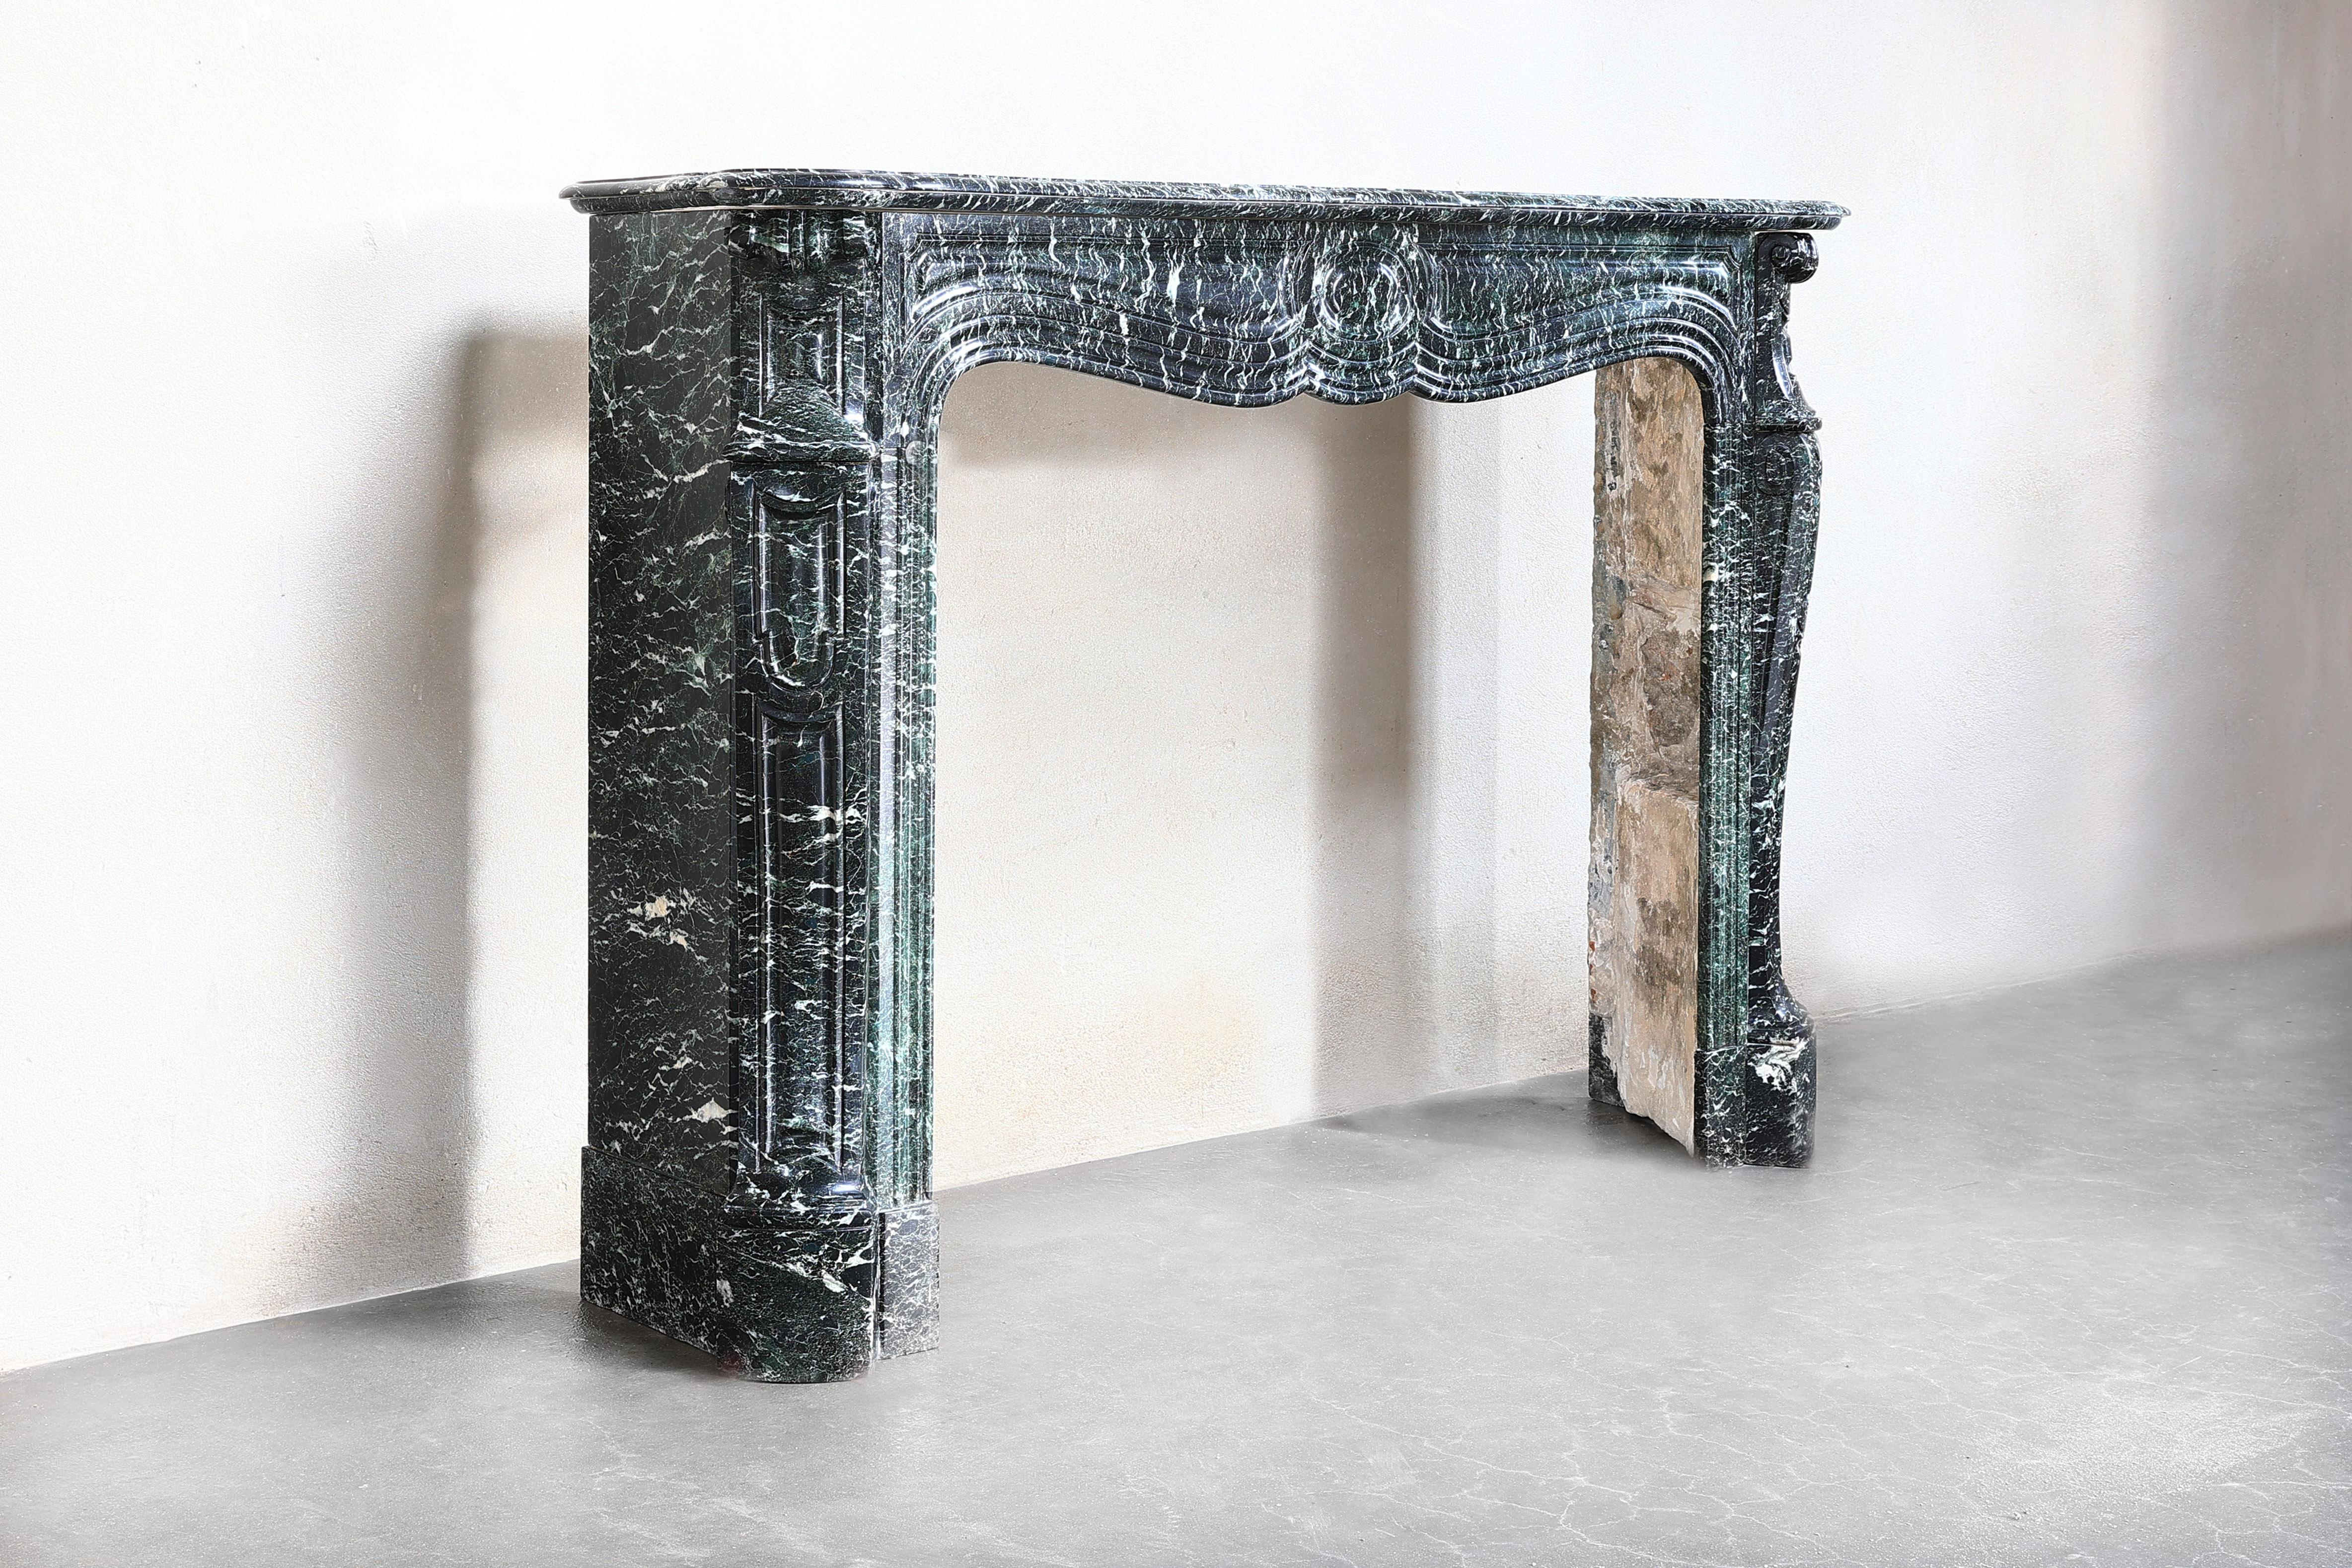 Beautiful antique fireplace made of Vert de Mer marble in the style of Pompadour from 1850-1870. Pompadour fireplaces are recognizable by the rounding in the middle. This is a very charming and stylish mantle made of a special marble type.